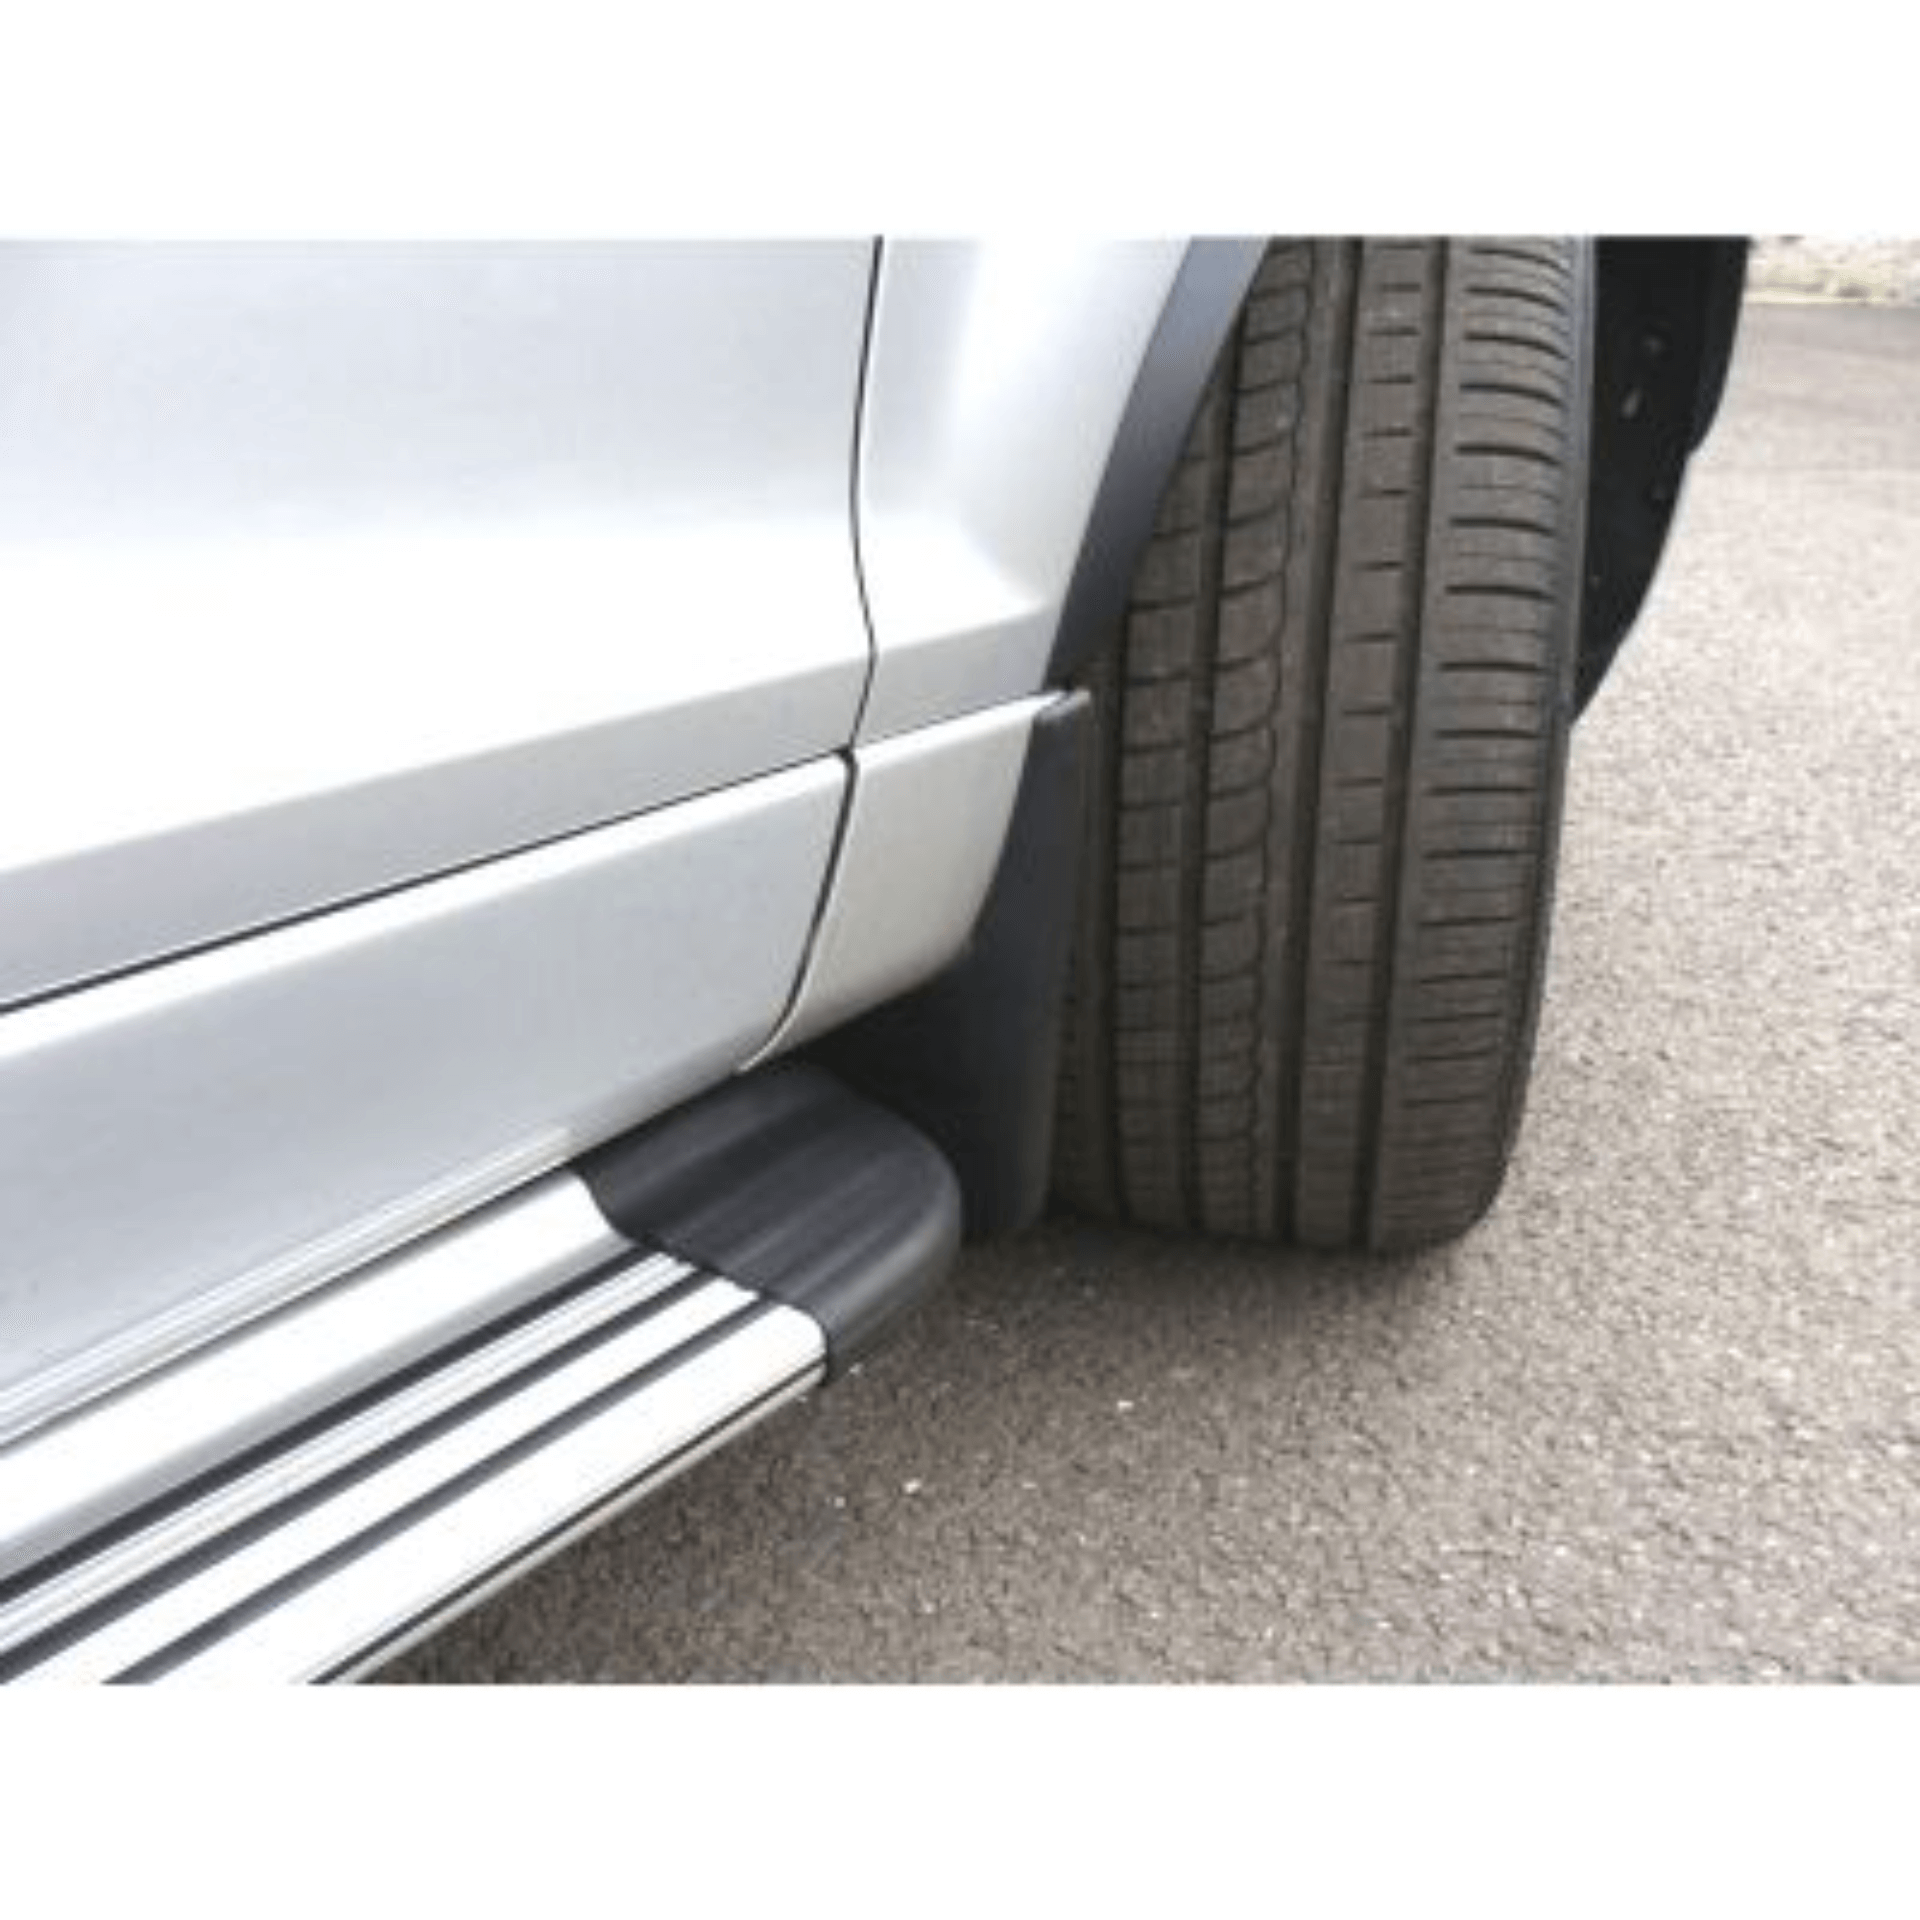 OE Style Mud Flaps Splash Guards for Audi Q7 2005-2015 -  - sold by Direct4x4